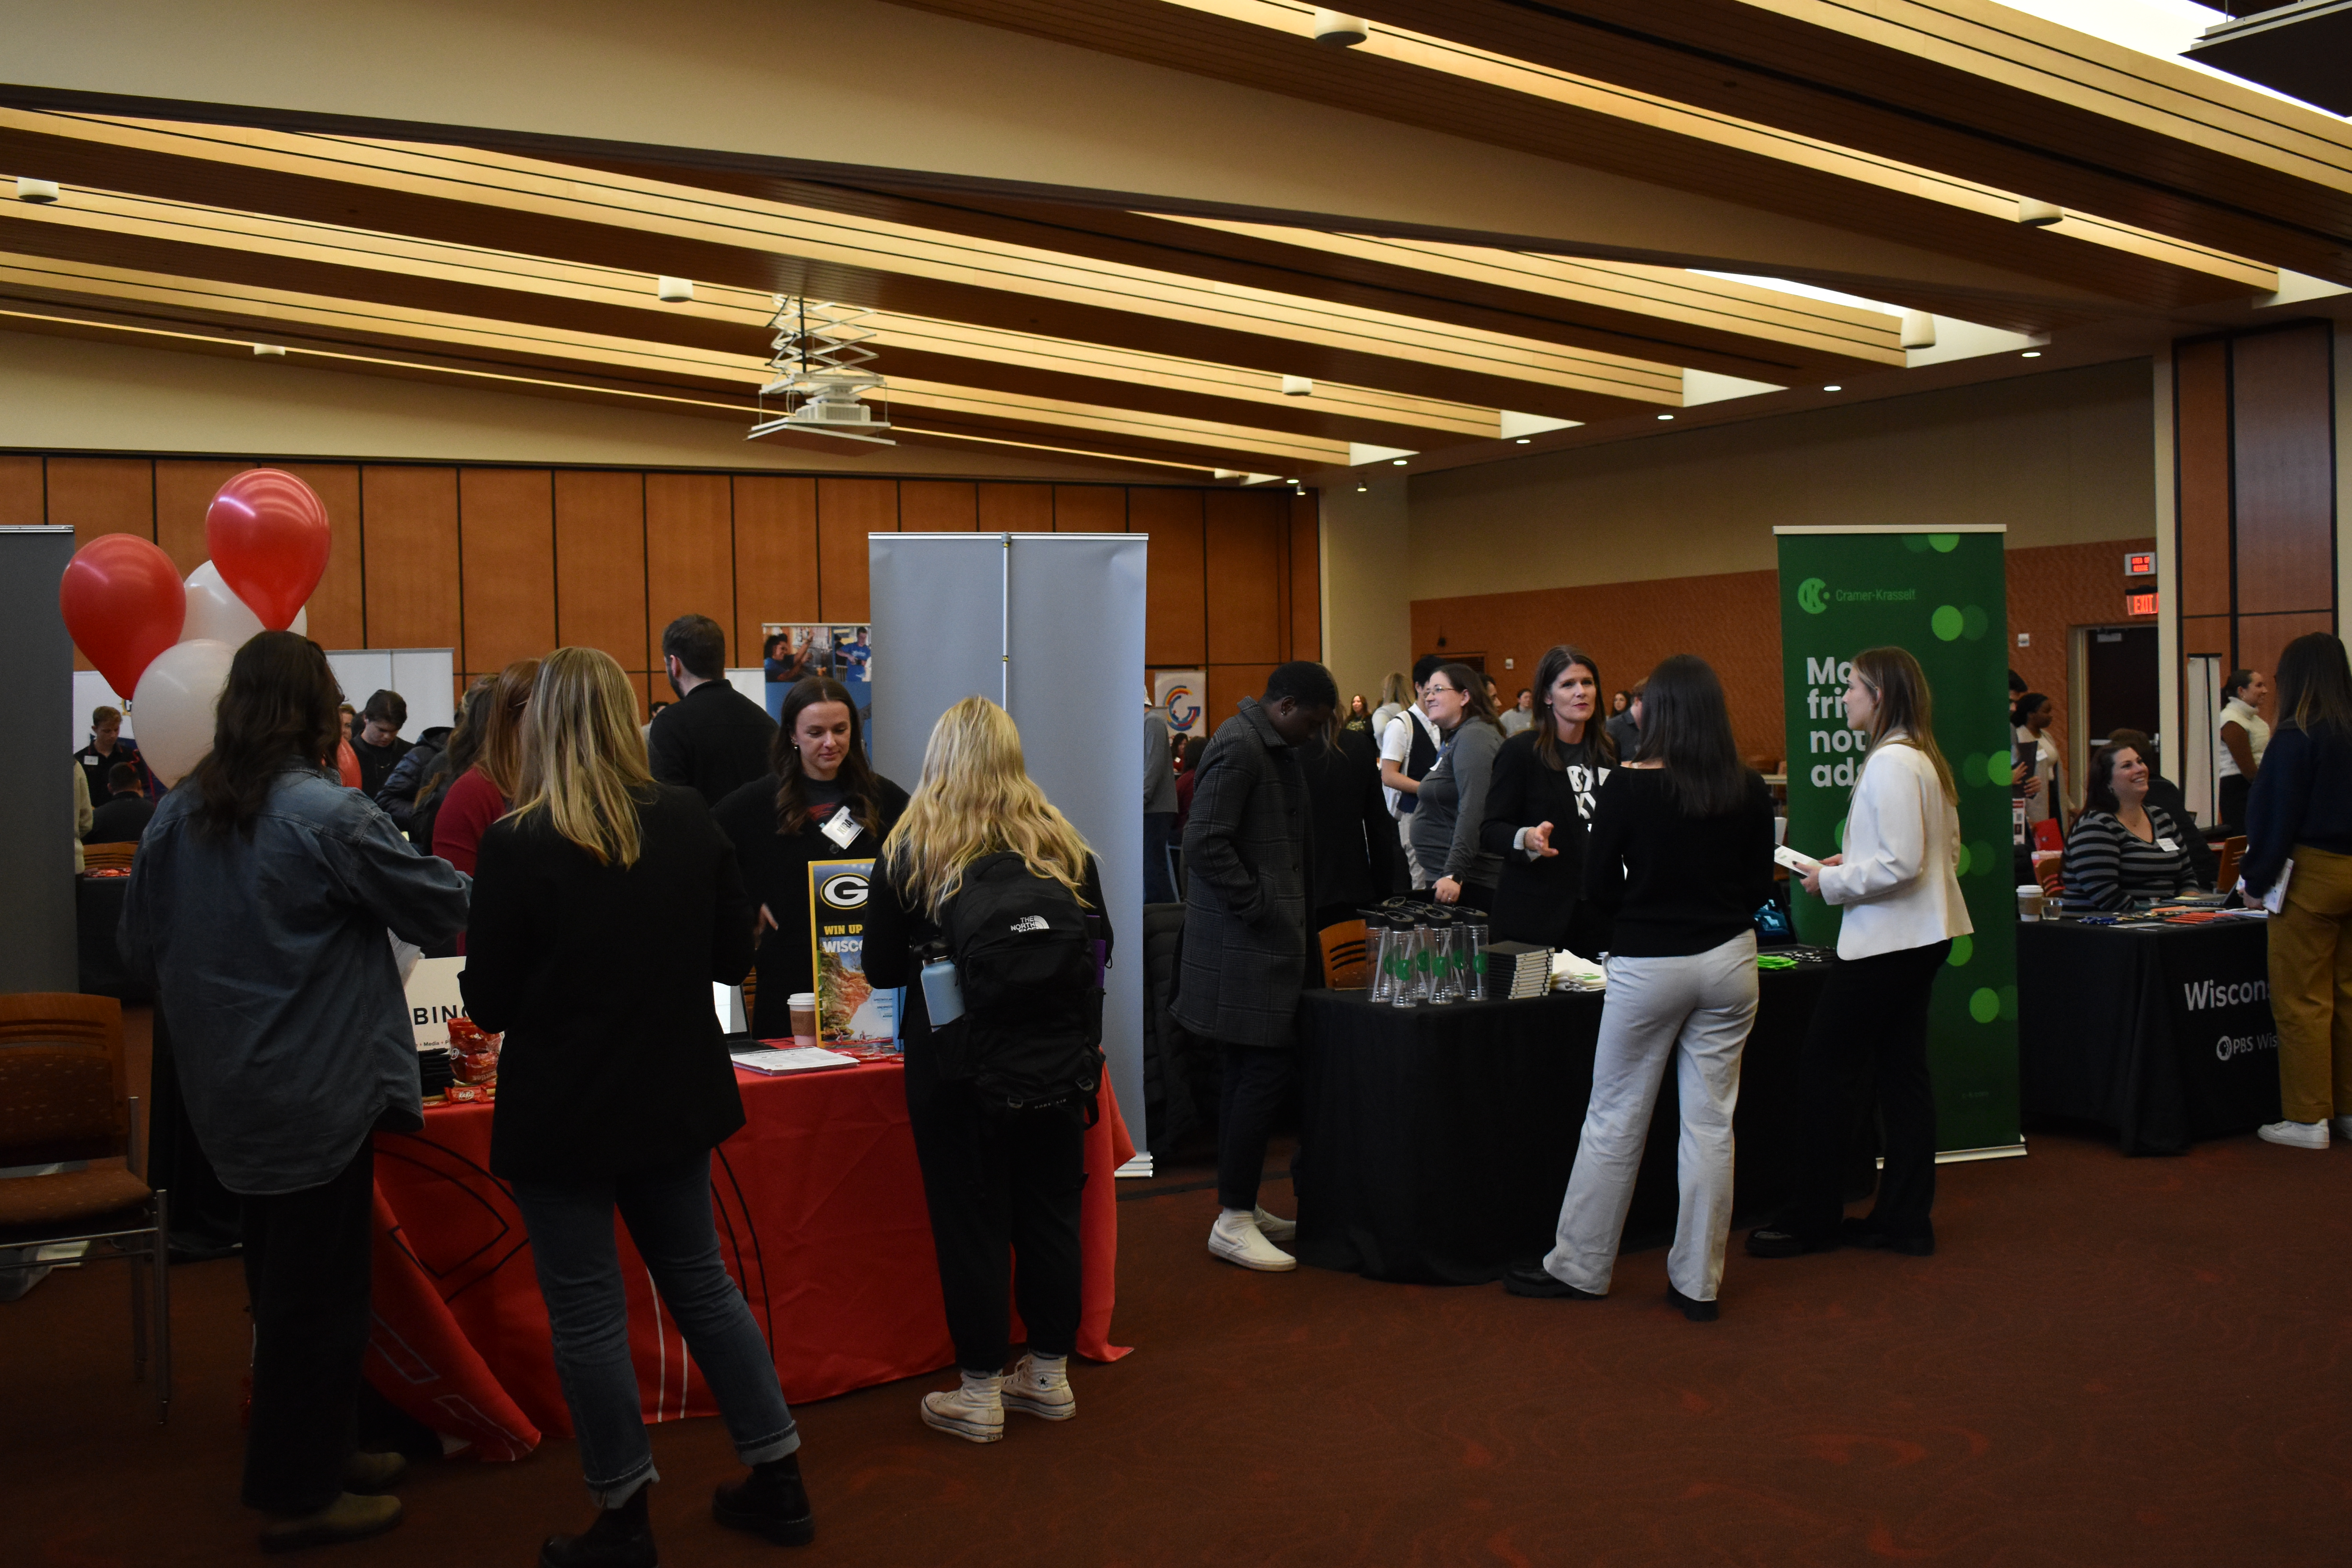 Students met with employers from a variety of communications industries at the Advertising and Communications Career Fair